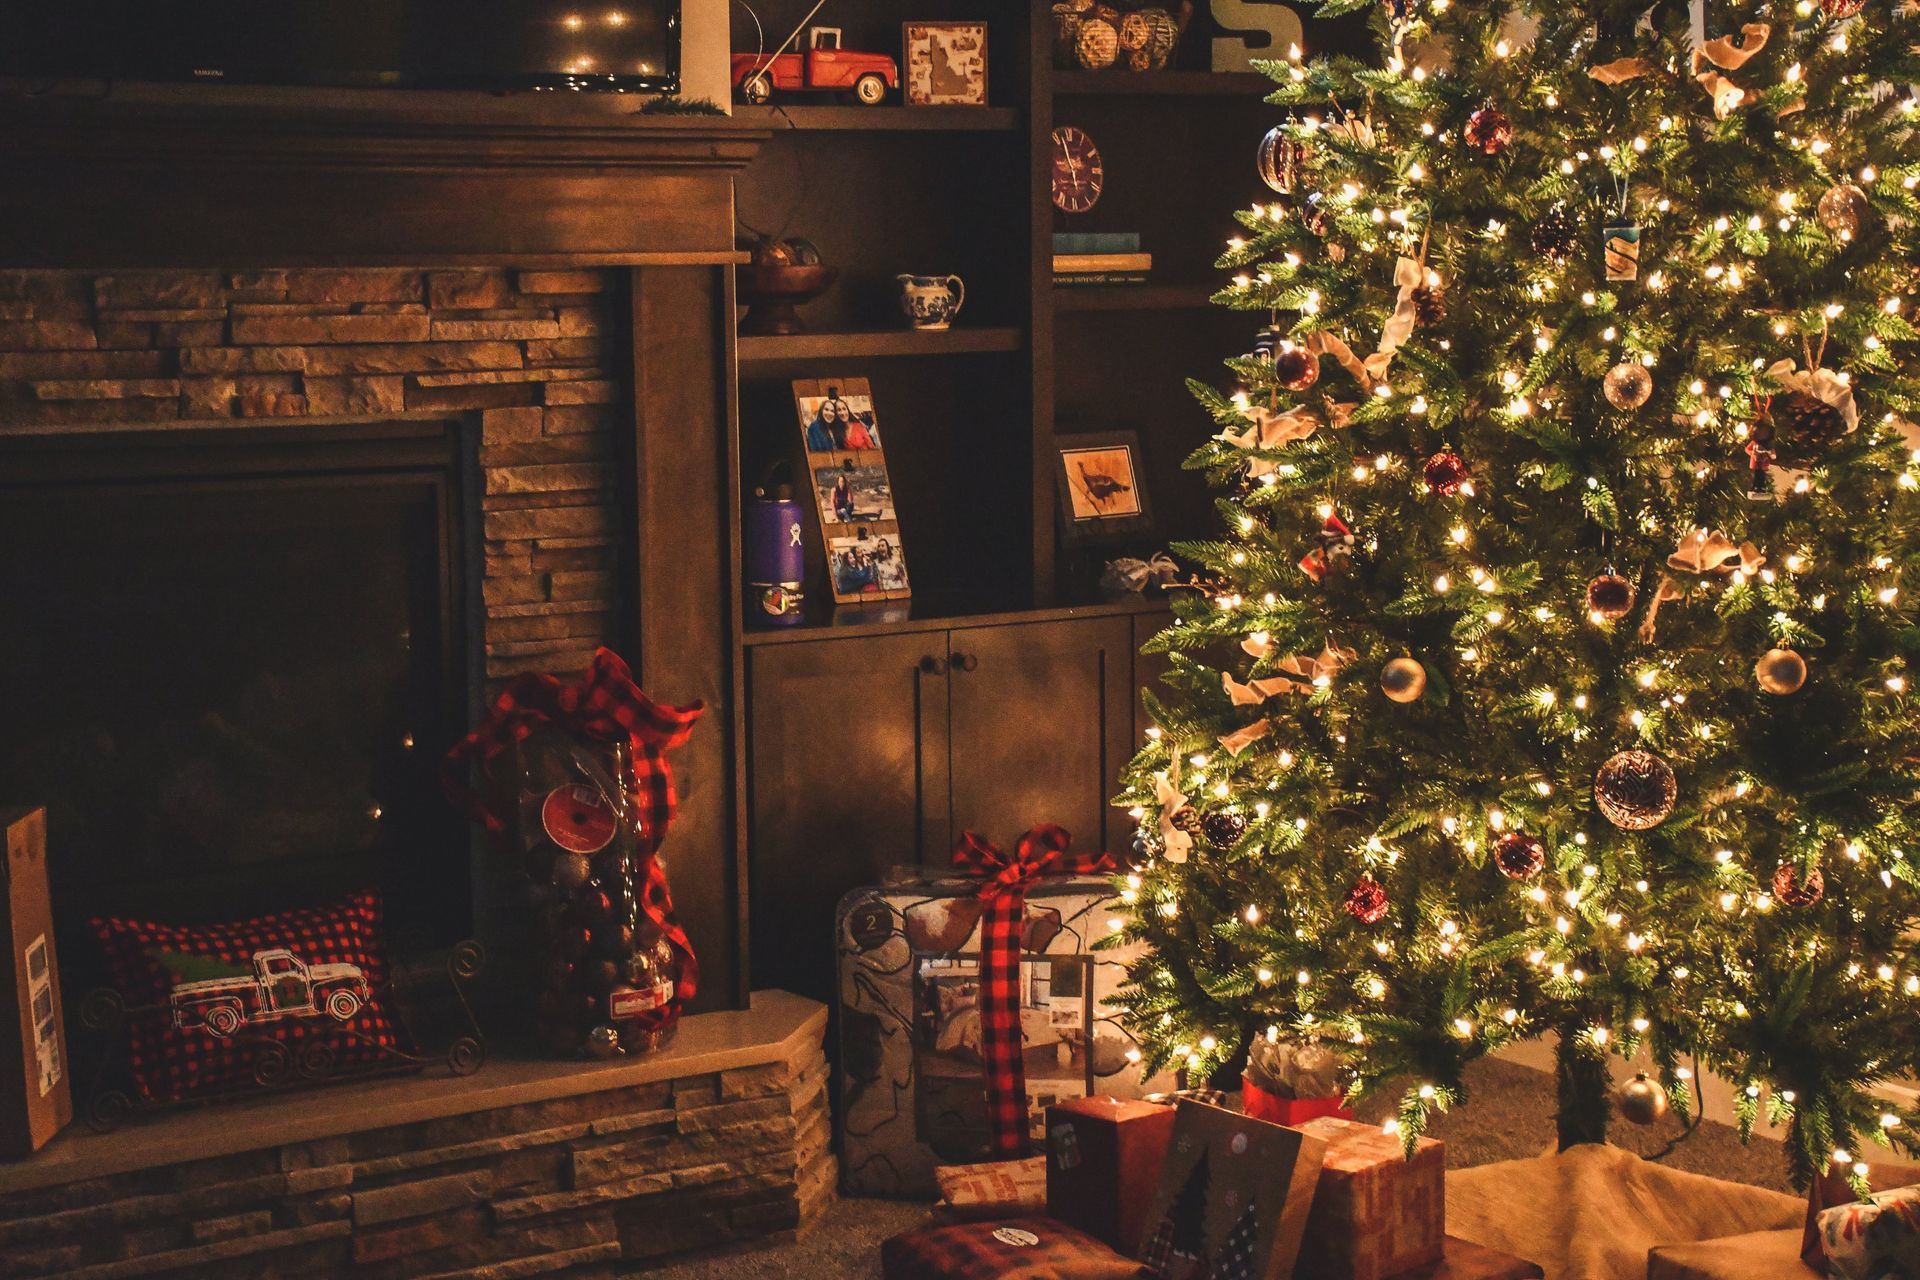 A beautiful Christmas scene. A tree with lights and presents by the fireplace.